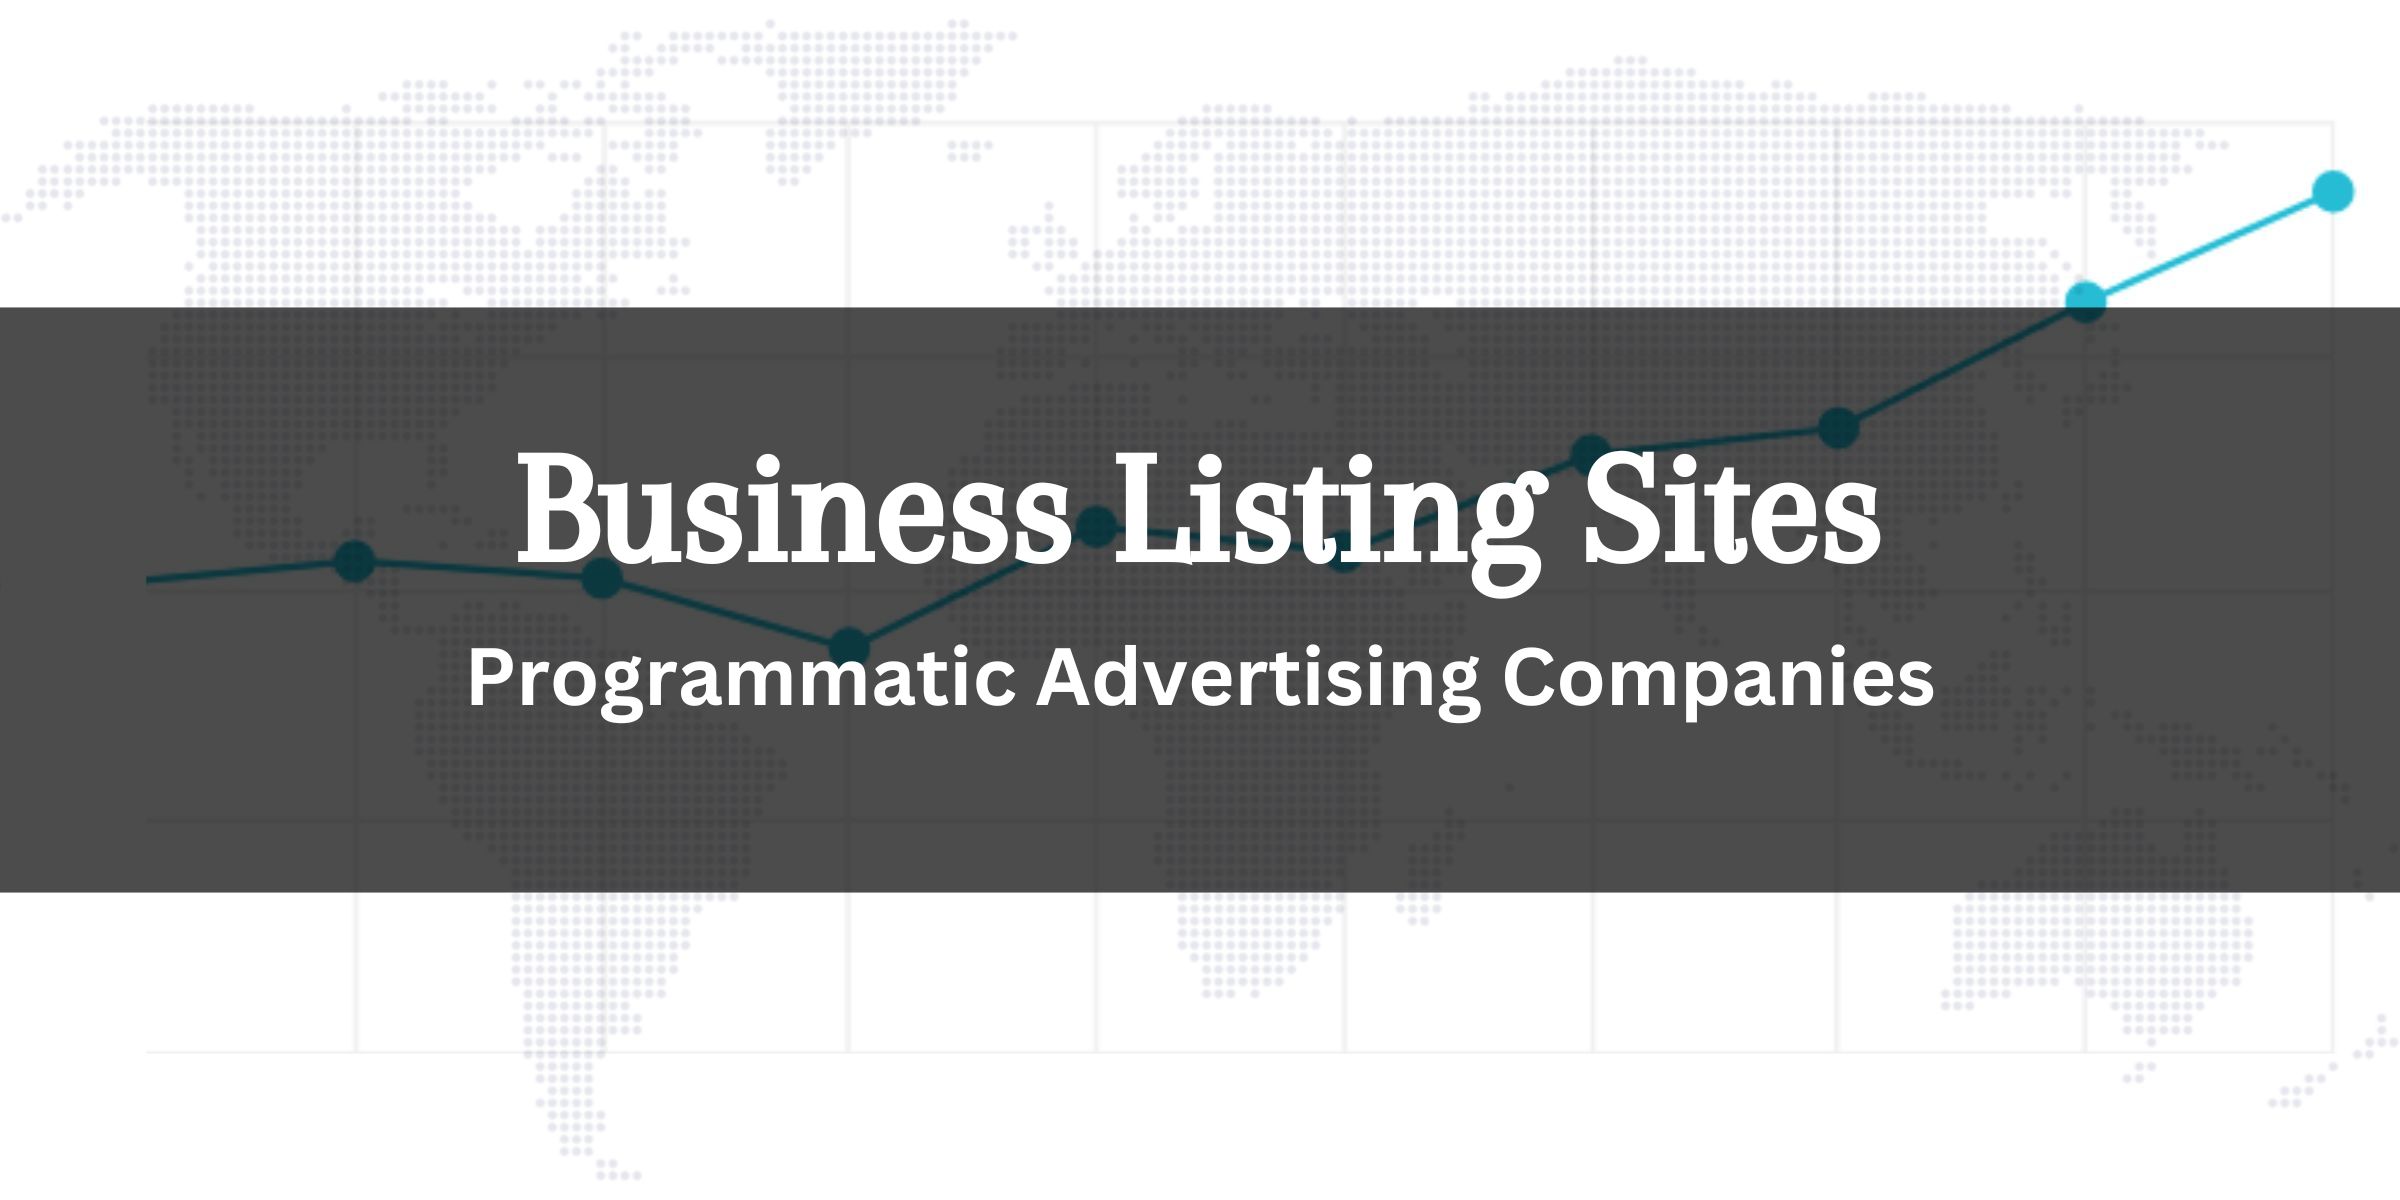 Top Business Listing Sites for Programmatic Advertising Companies